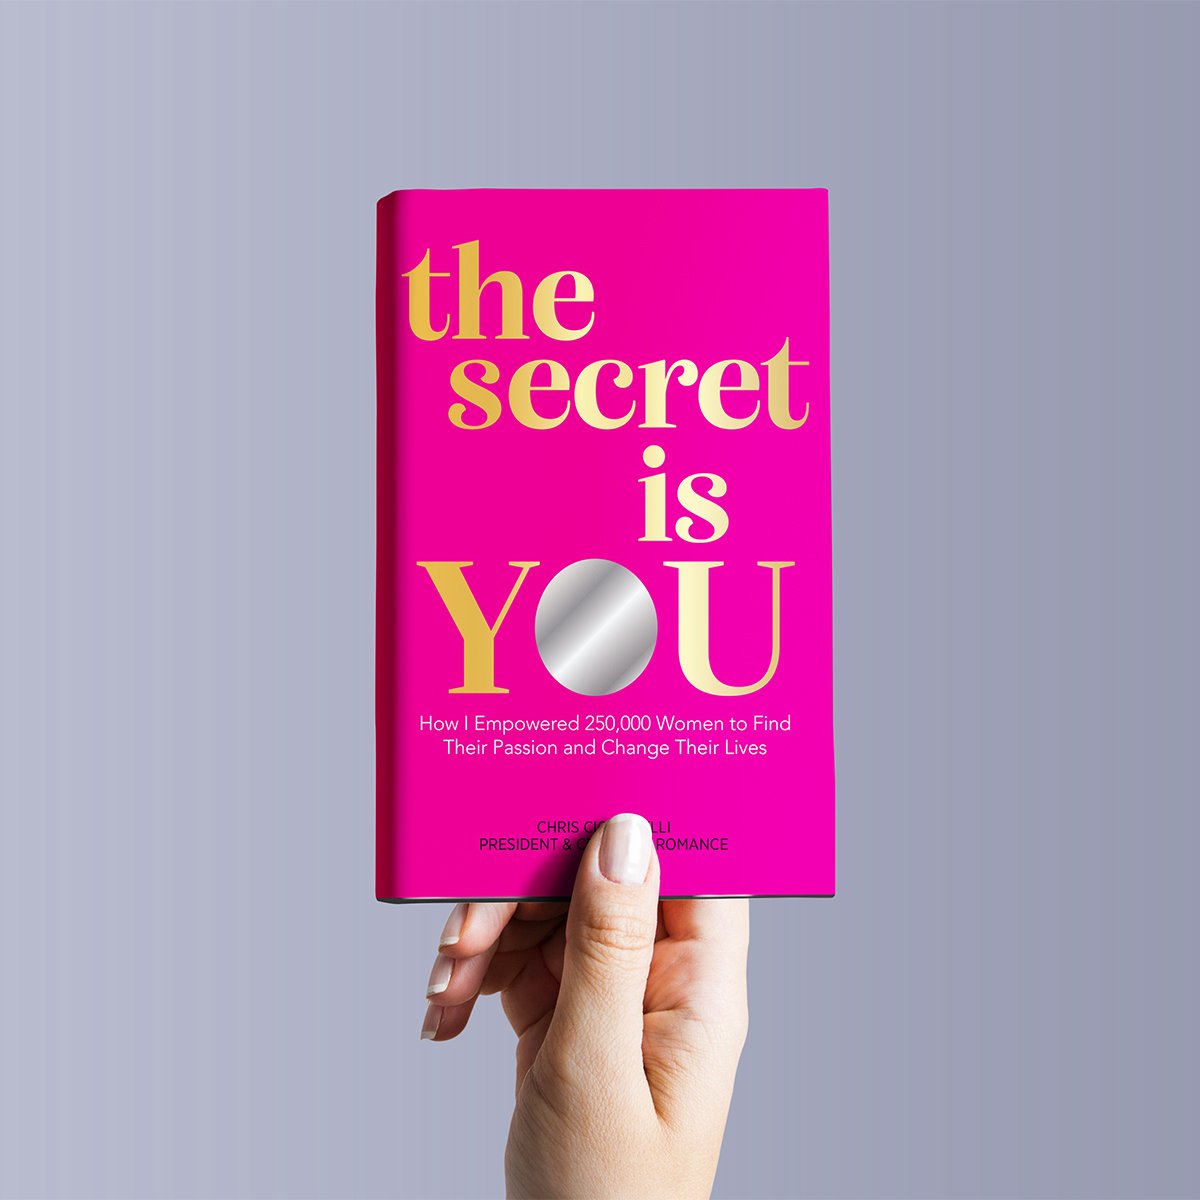 the secret is YOU